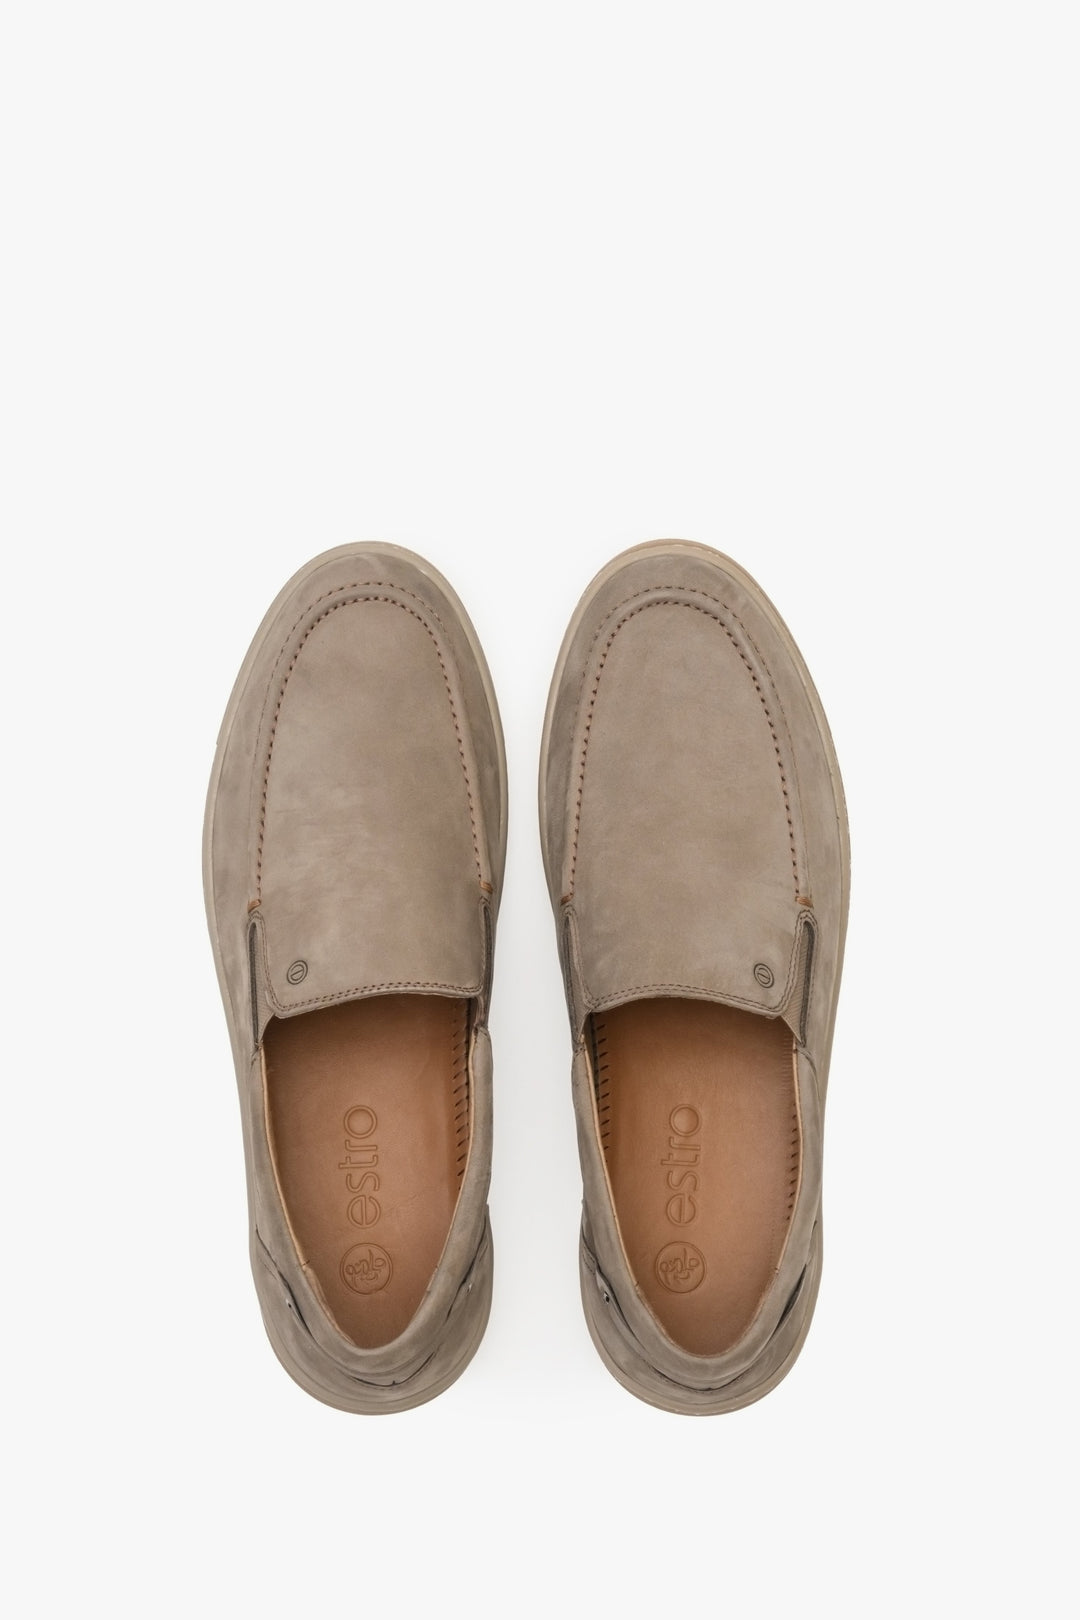 Brown men's Estro loafers for spring - footwear presentation from above.